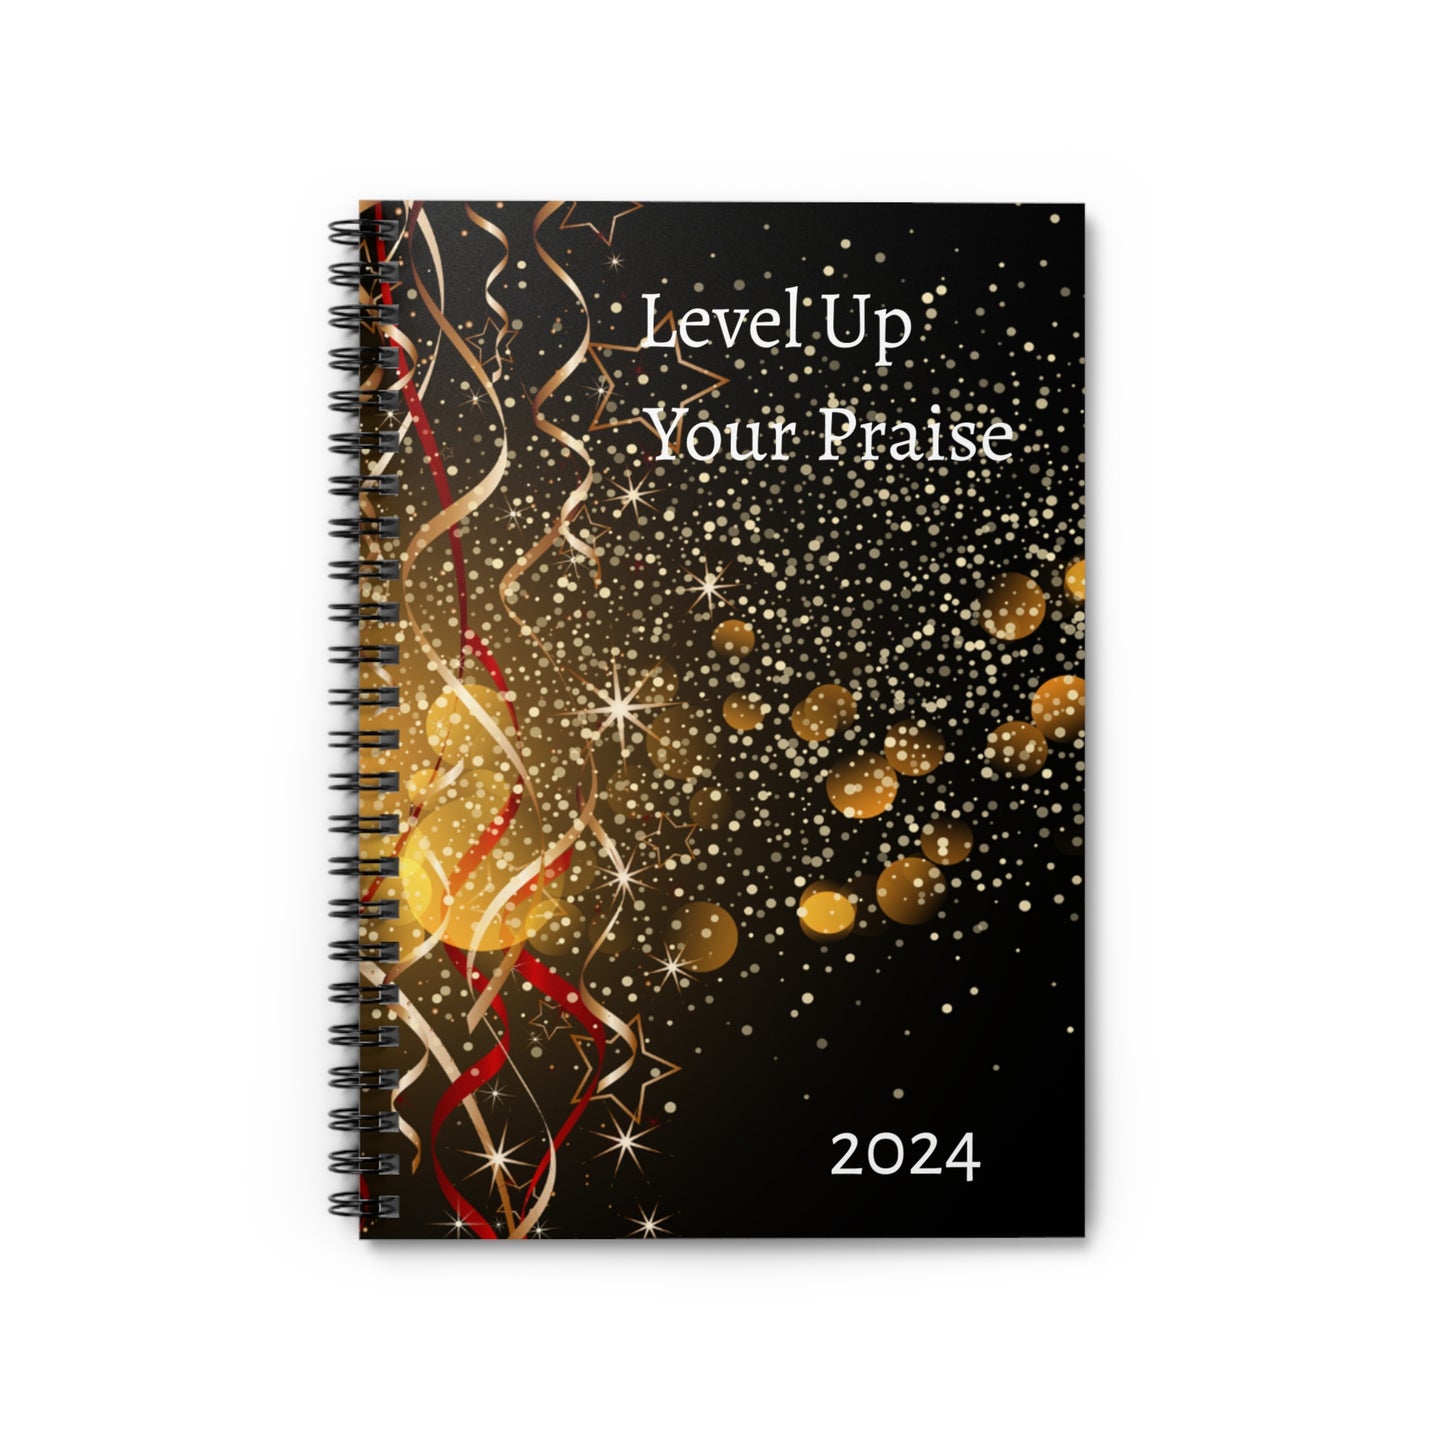 Level Up your Praise: Spiral Notebook - Ruled Line